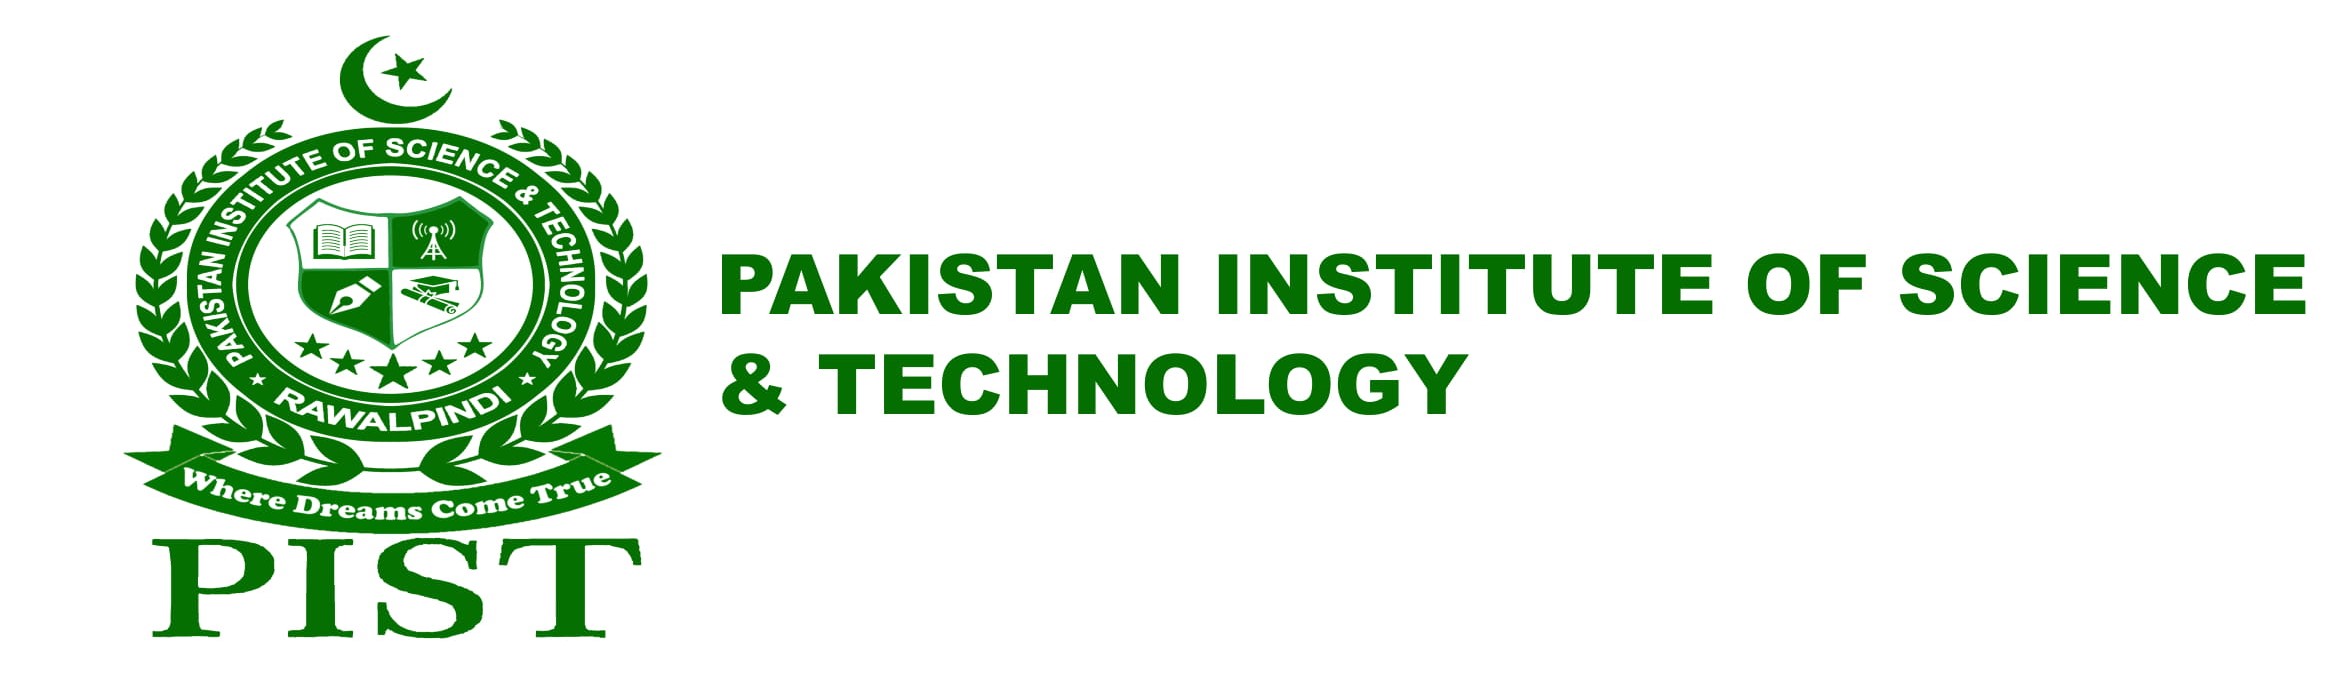 Pakistan Institute of Science and Technology